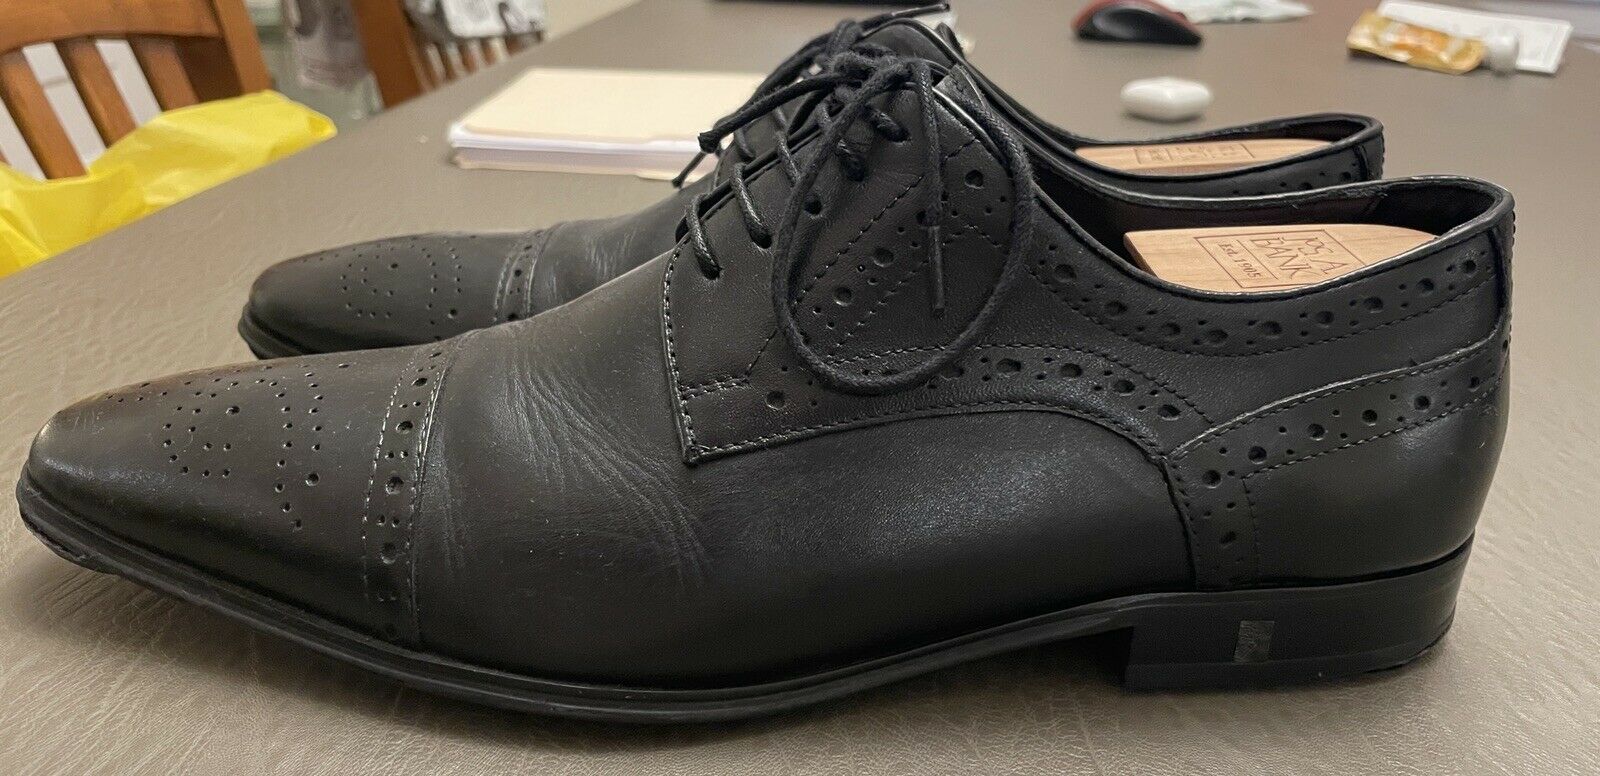 Versace Mens Leather Dress Shoes-Great Condition! Size 10 US